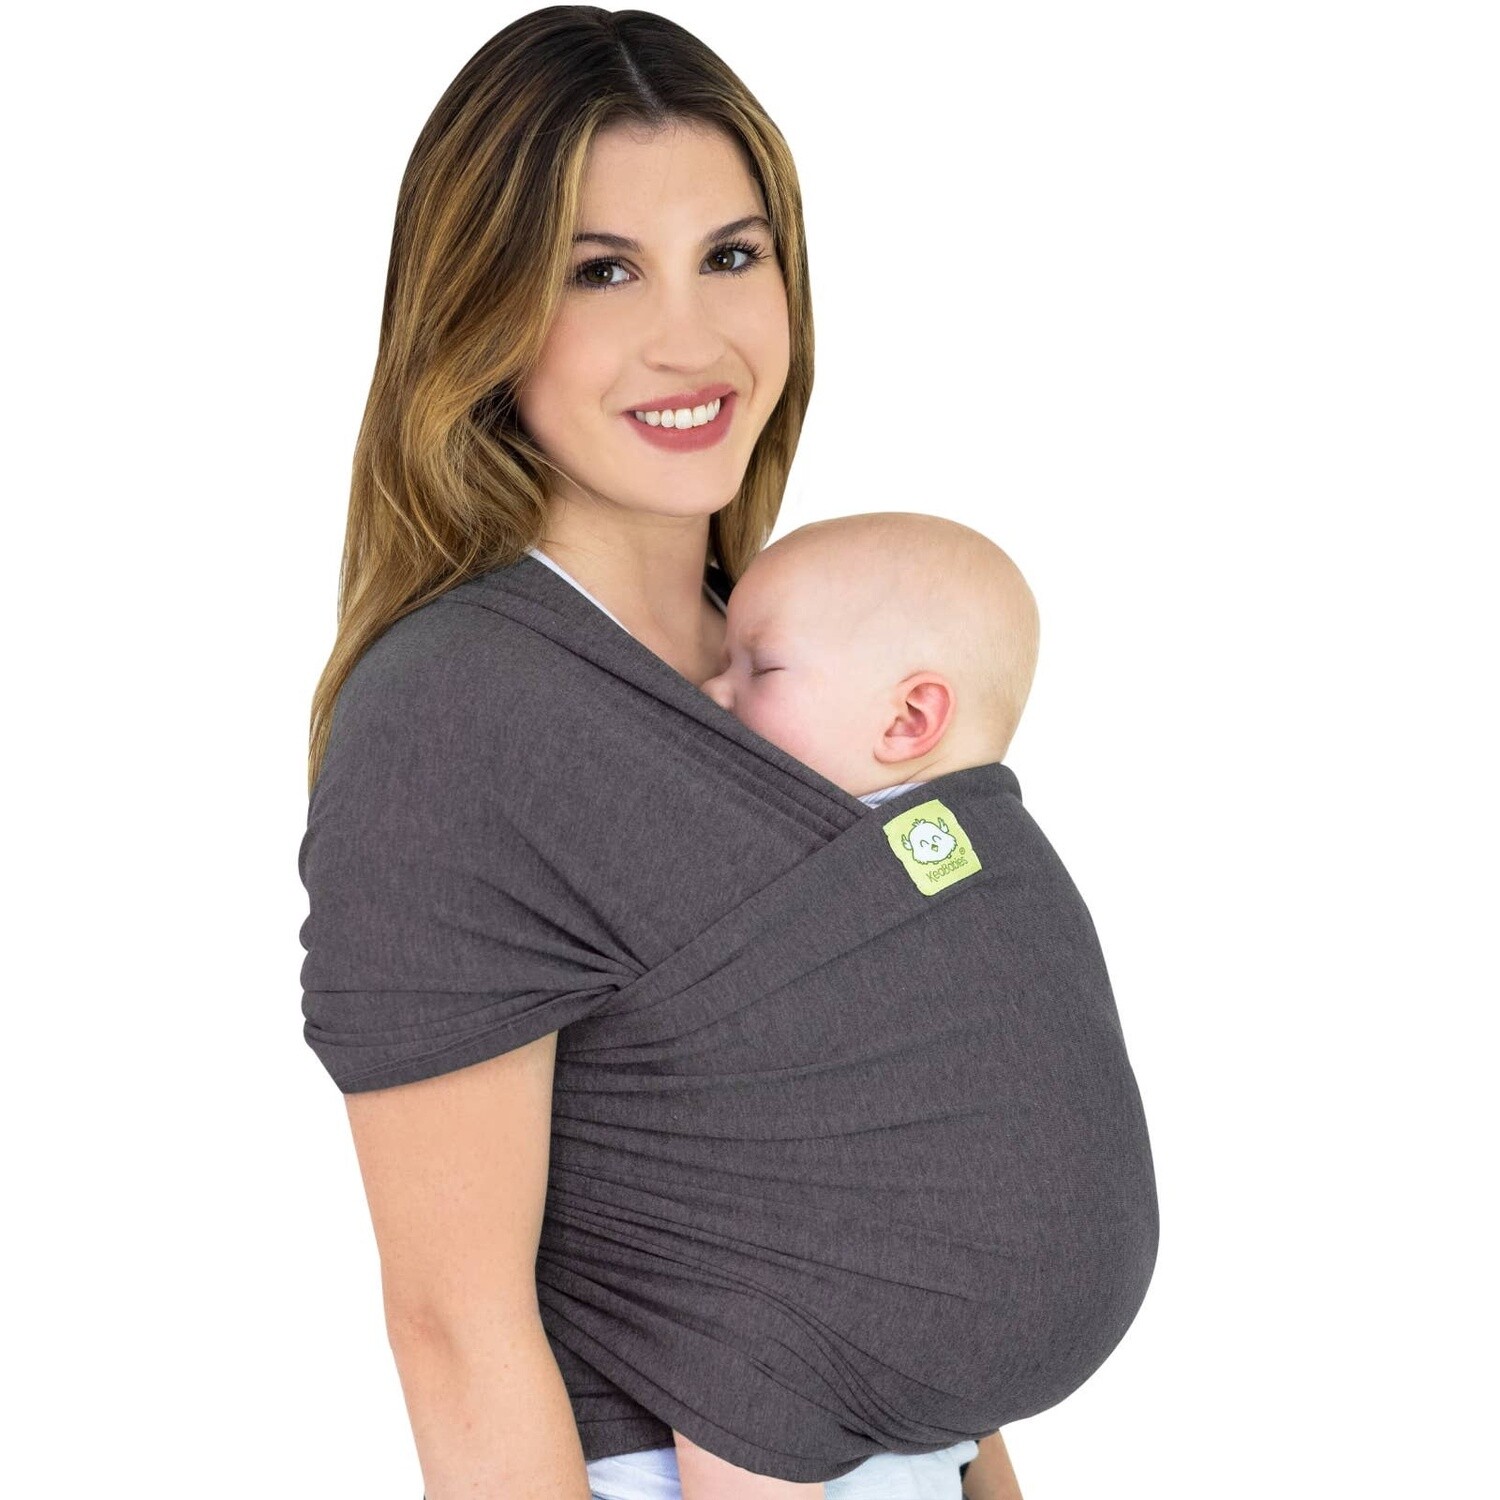 KeaBabies Baby Wrap Carrier- Charcoal